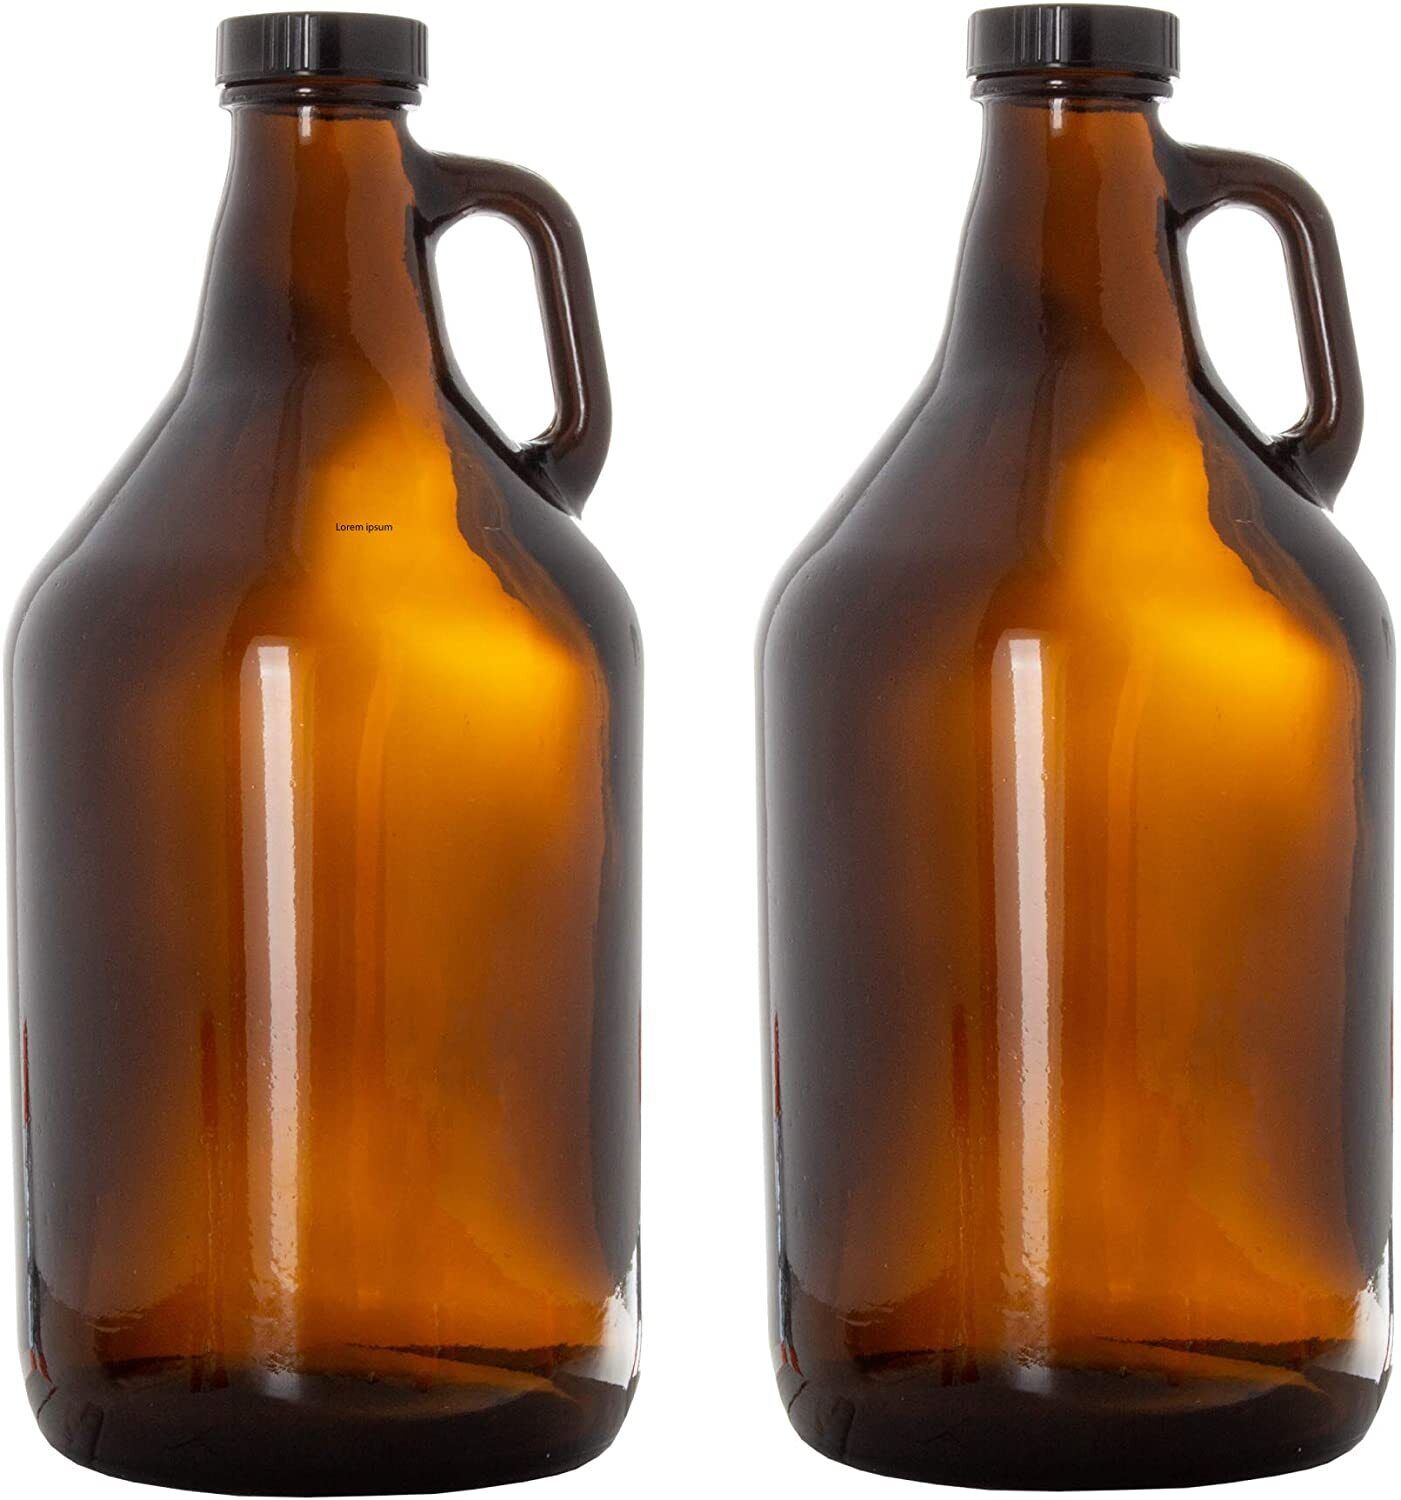 Glass Growlers For Beer, 2 Pack With Funnel - 64 Oz Growler Set With Lids